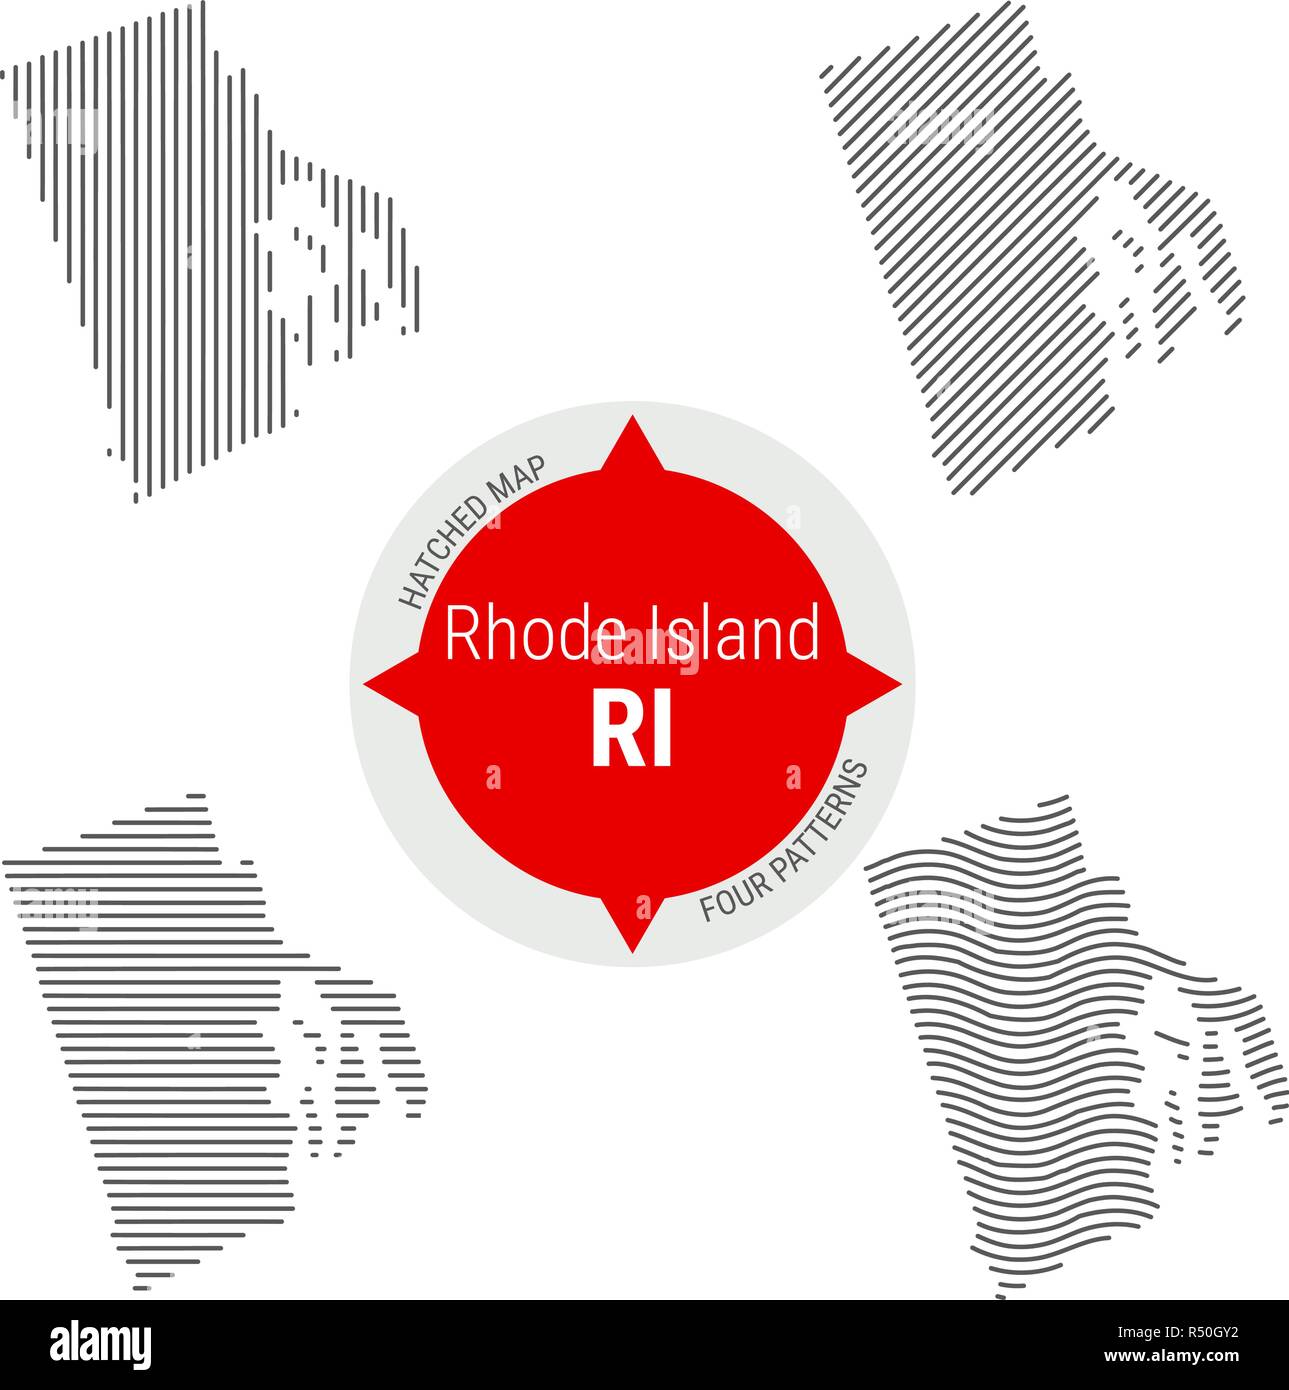 Hatched Pattern Vector Map of Rhode Island. Stylized Simple Silhouette of Rhode Island. Four Different Patterns Stock Vector